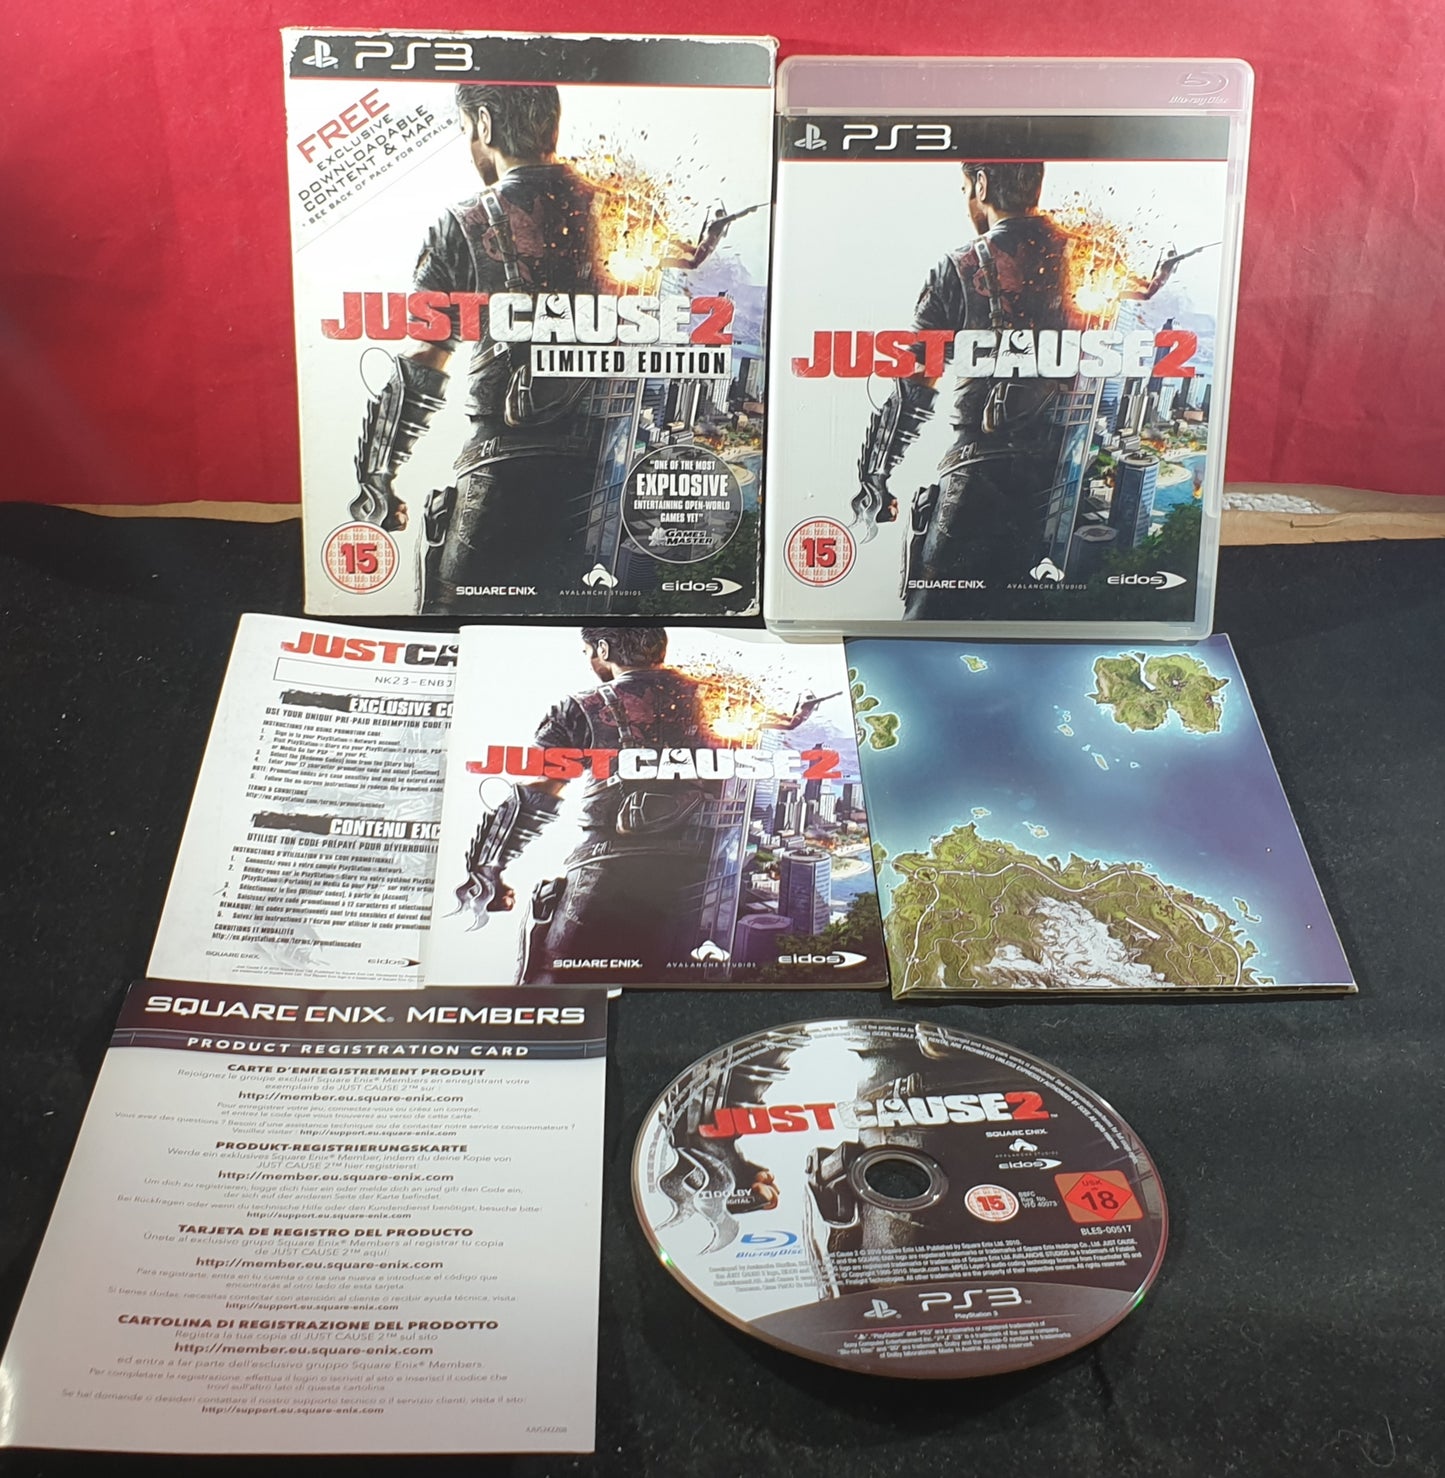 Just Cause 2 Limited Edition with Map Sony Playstation 3 (PS3) Game